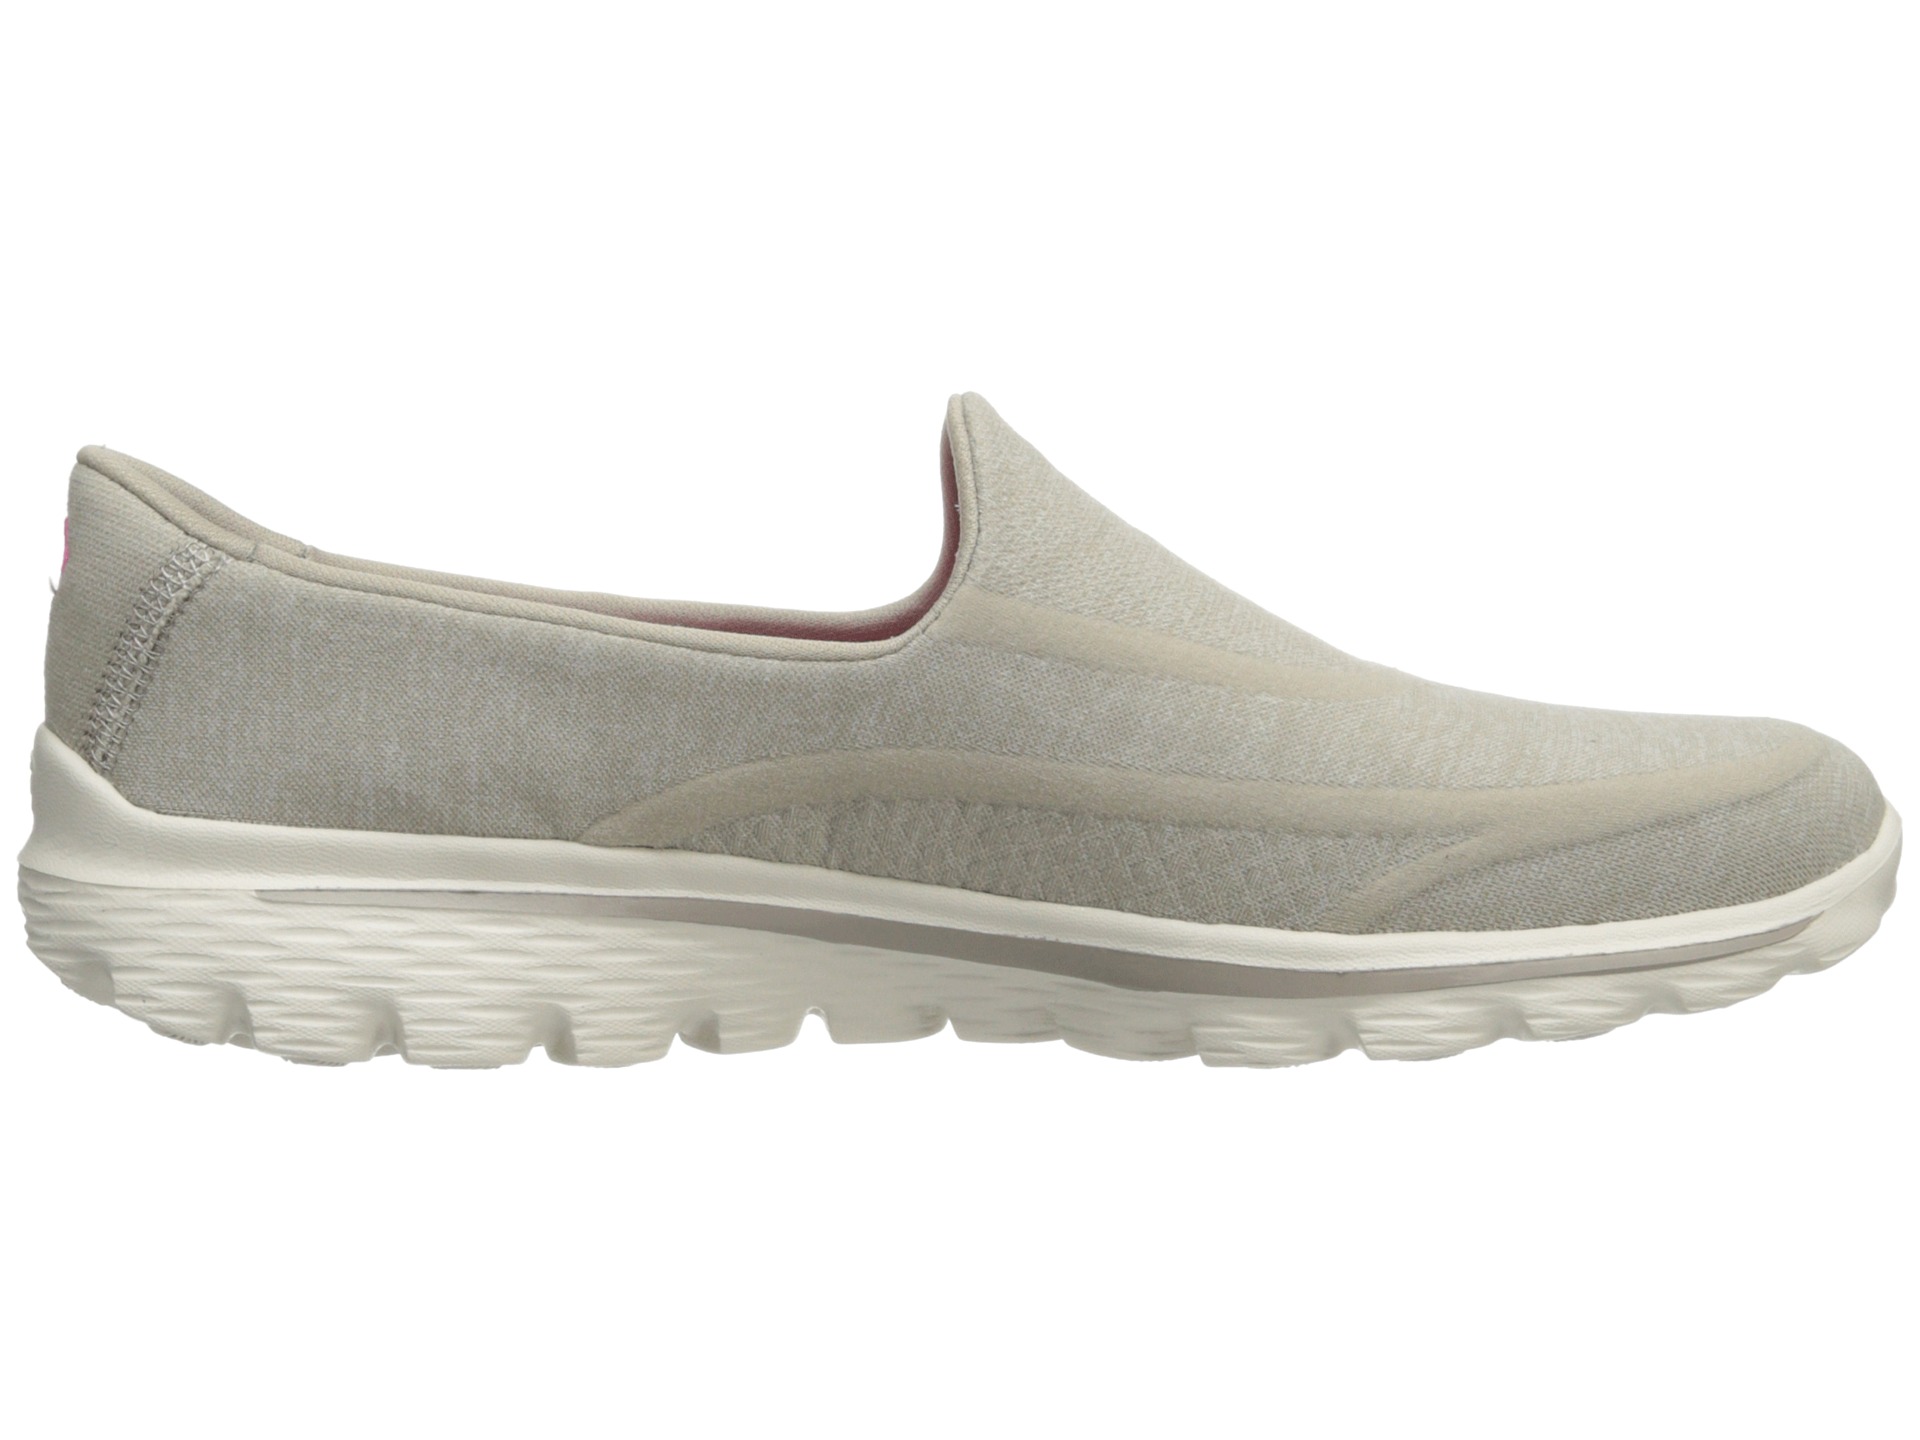 Skechers Performance Go Walk 2 Supersock Taupe | Shipped Free at Zappos